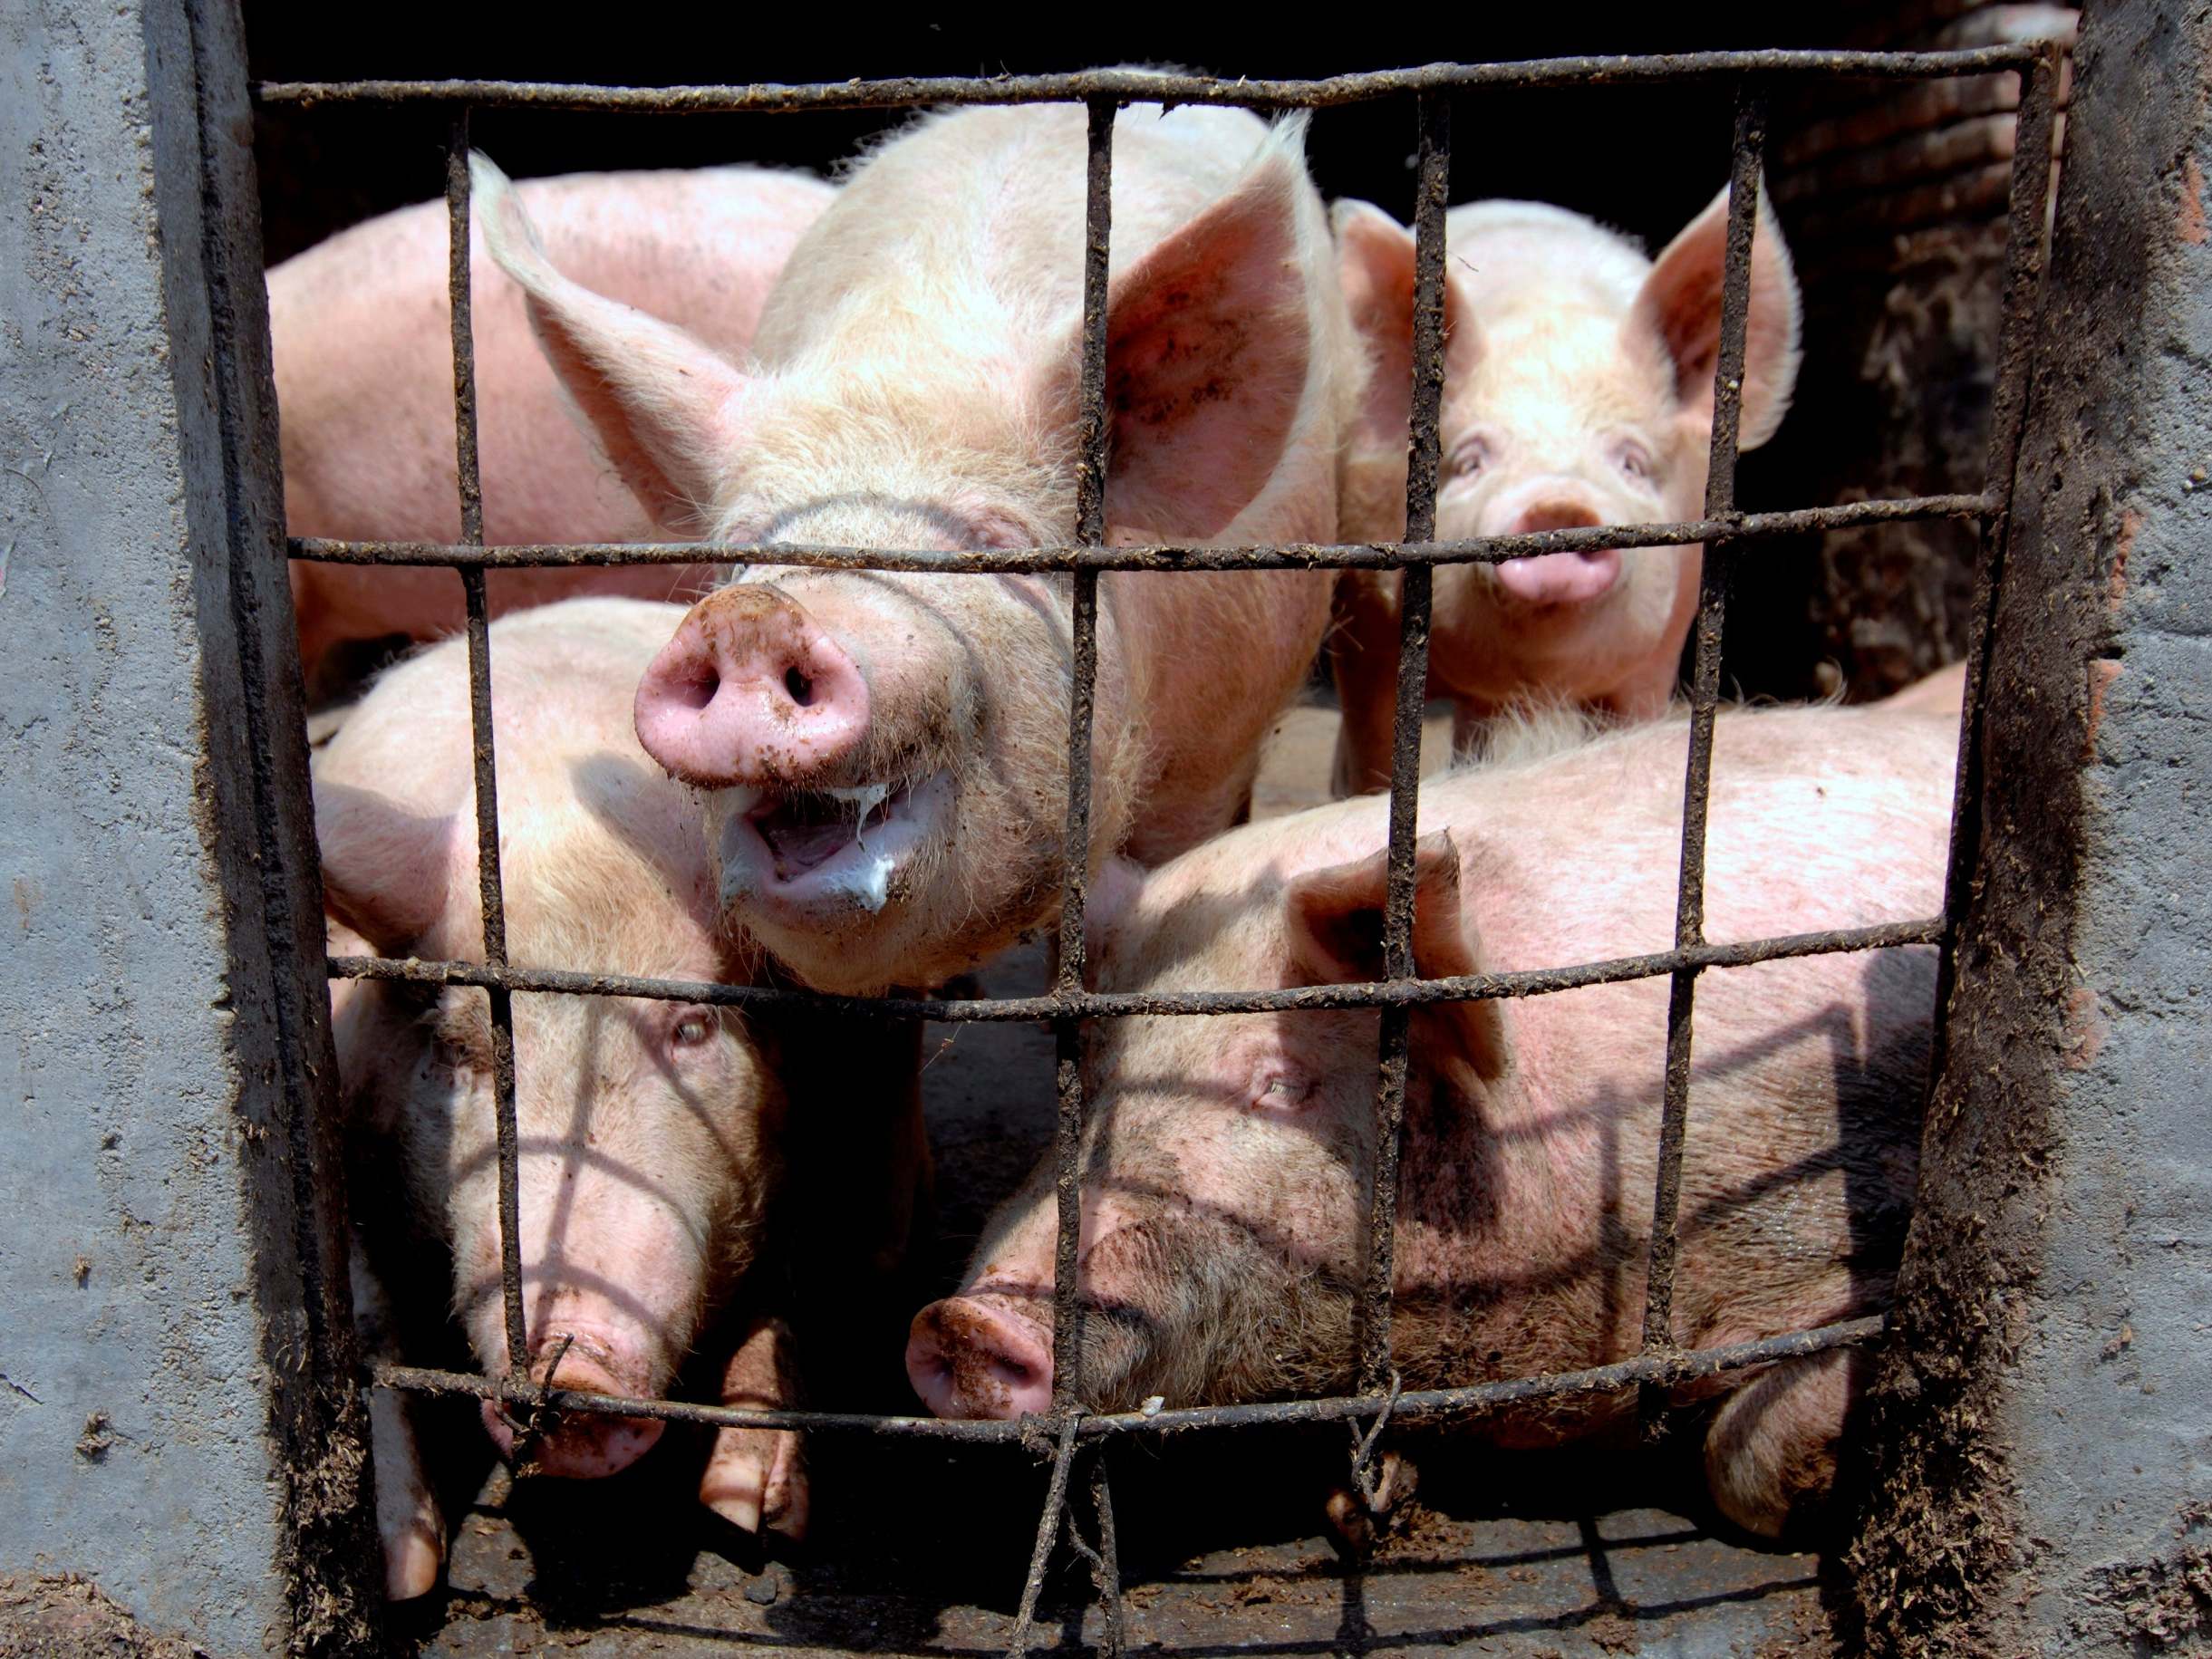 Researchers who studied pigs at Chinese farms have detected a new type of flu virus with pandemic potential